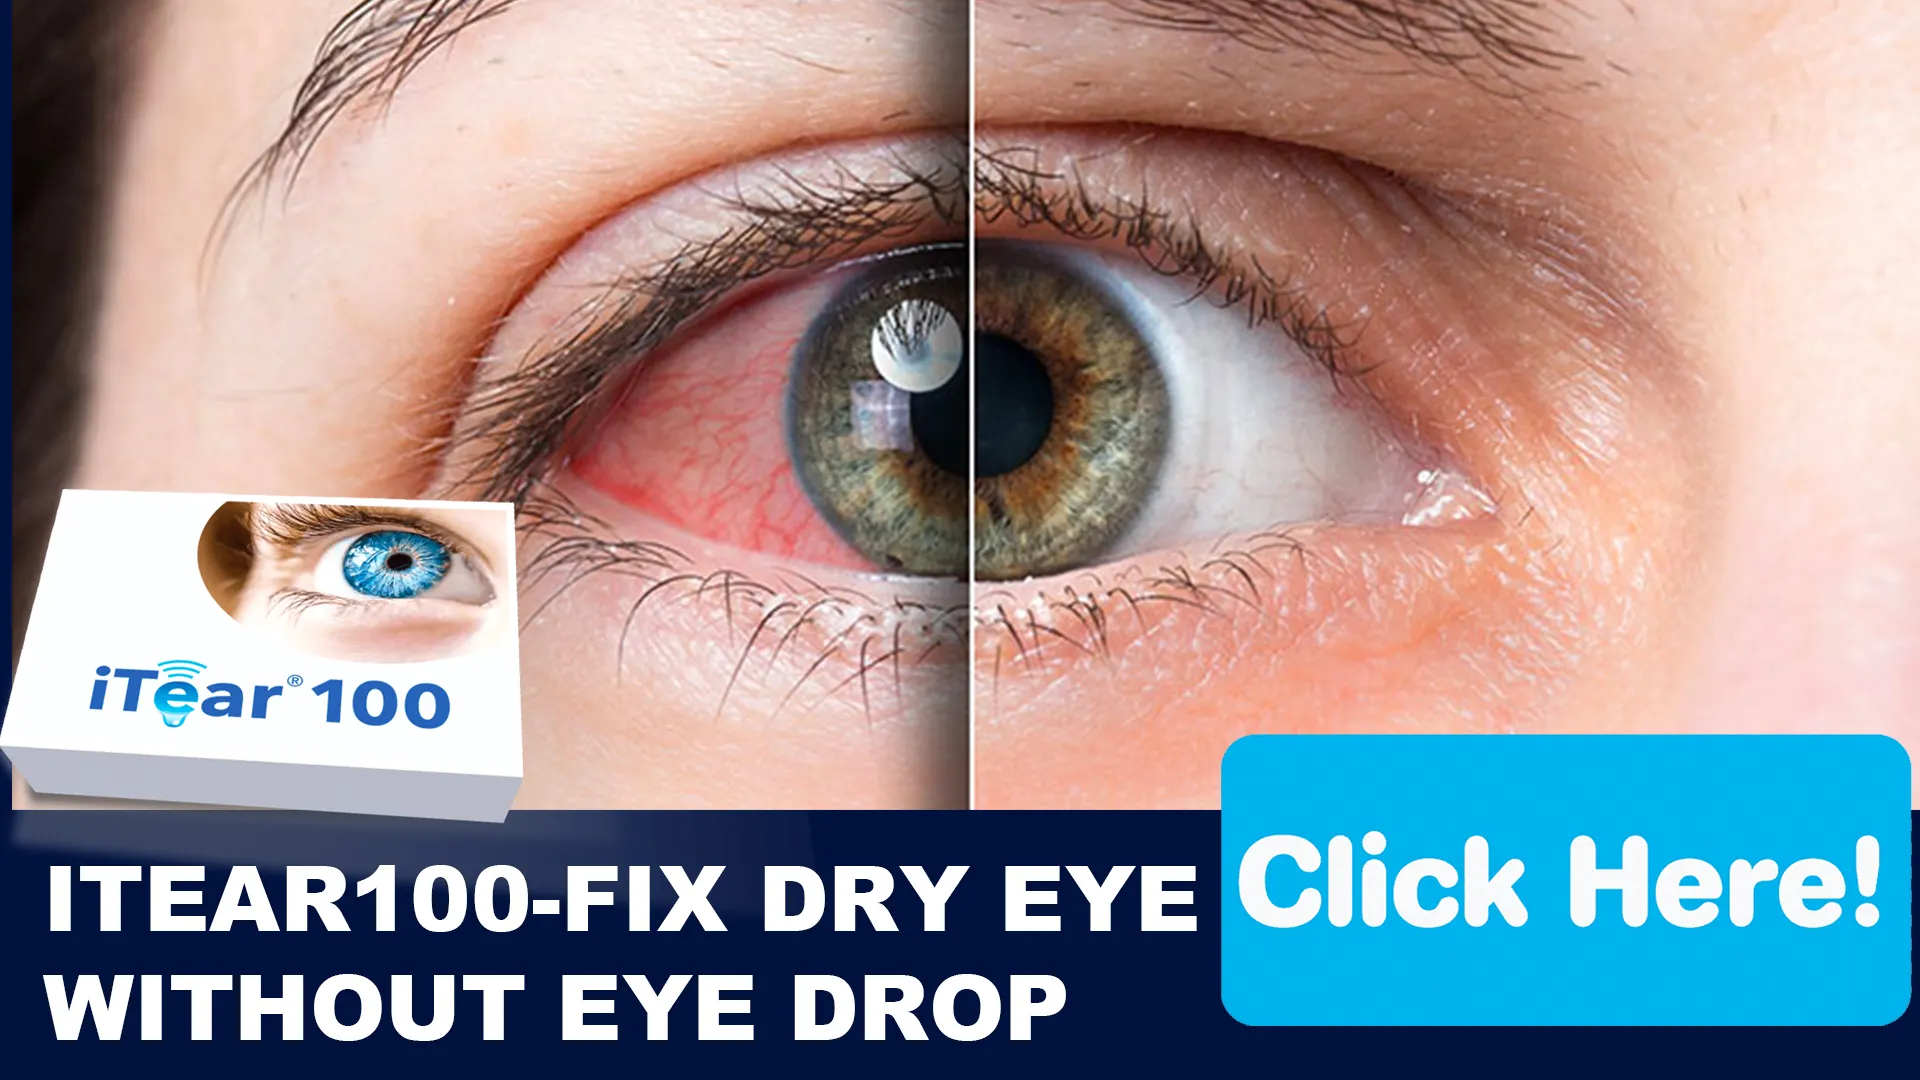 Join the Revolution in Dry Eye Relief!